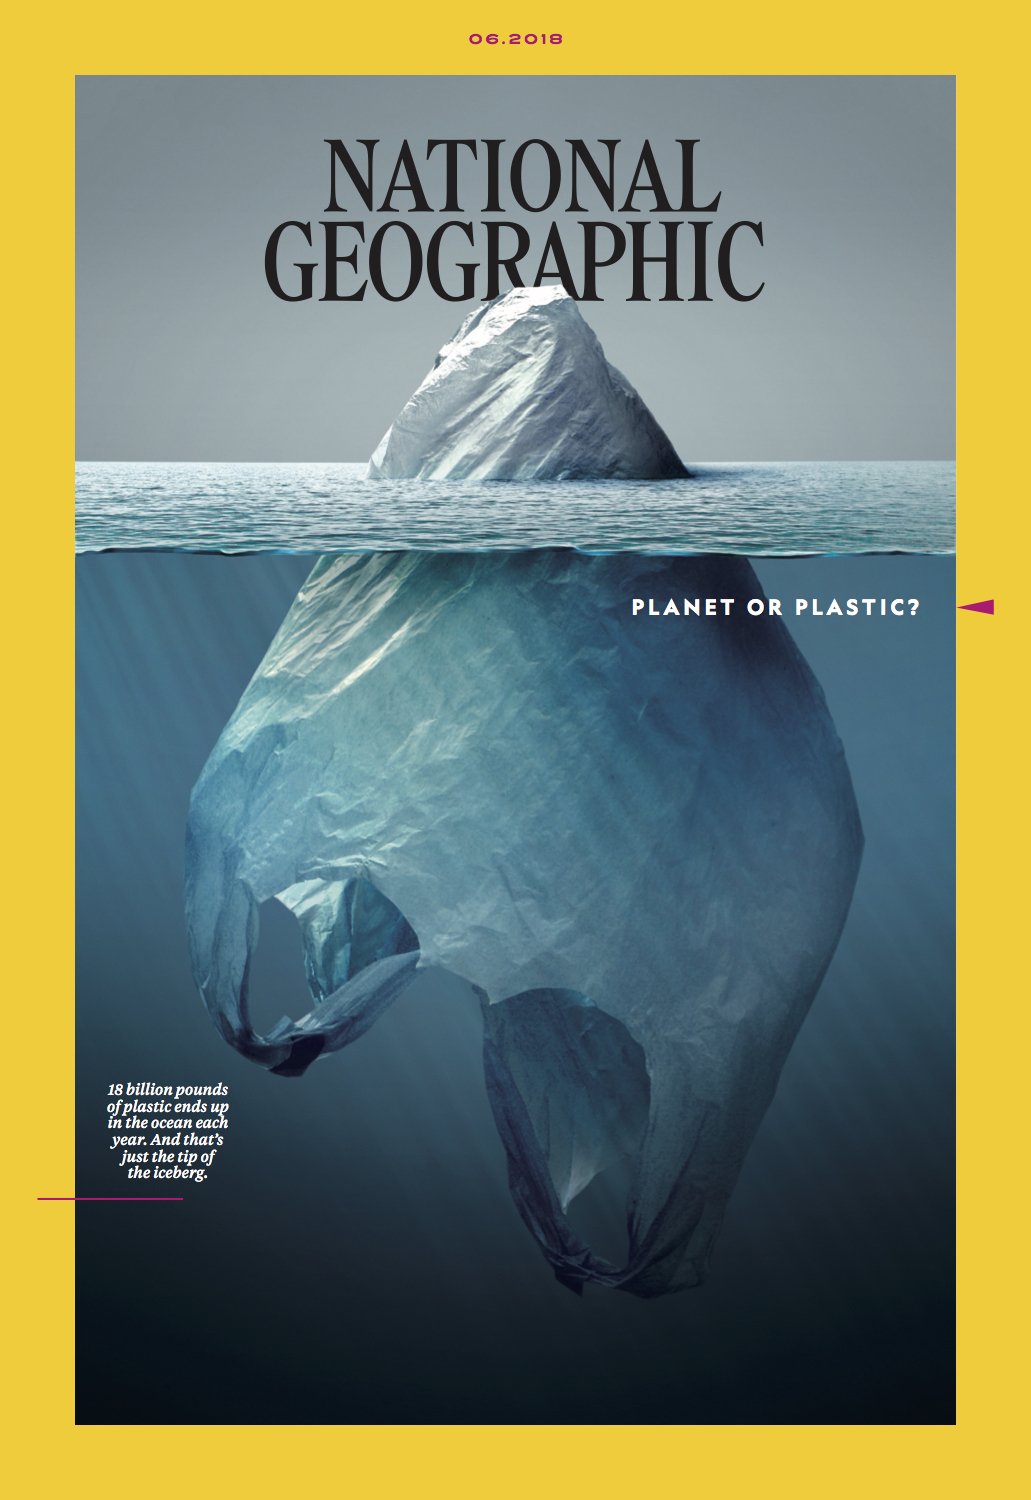 National Geographic's "Planet or plastic?" cover